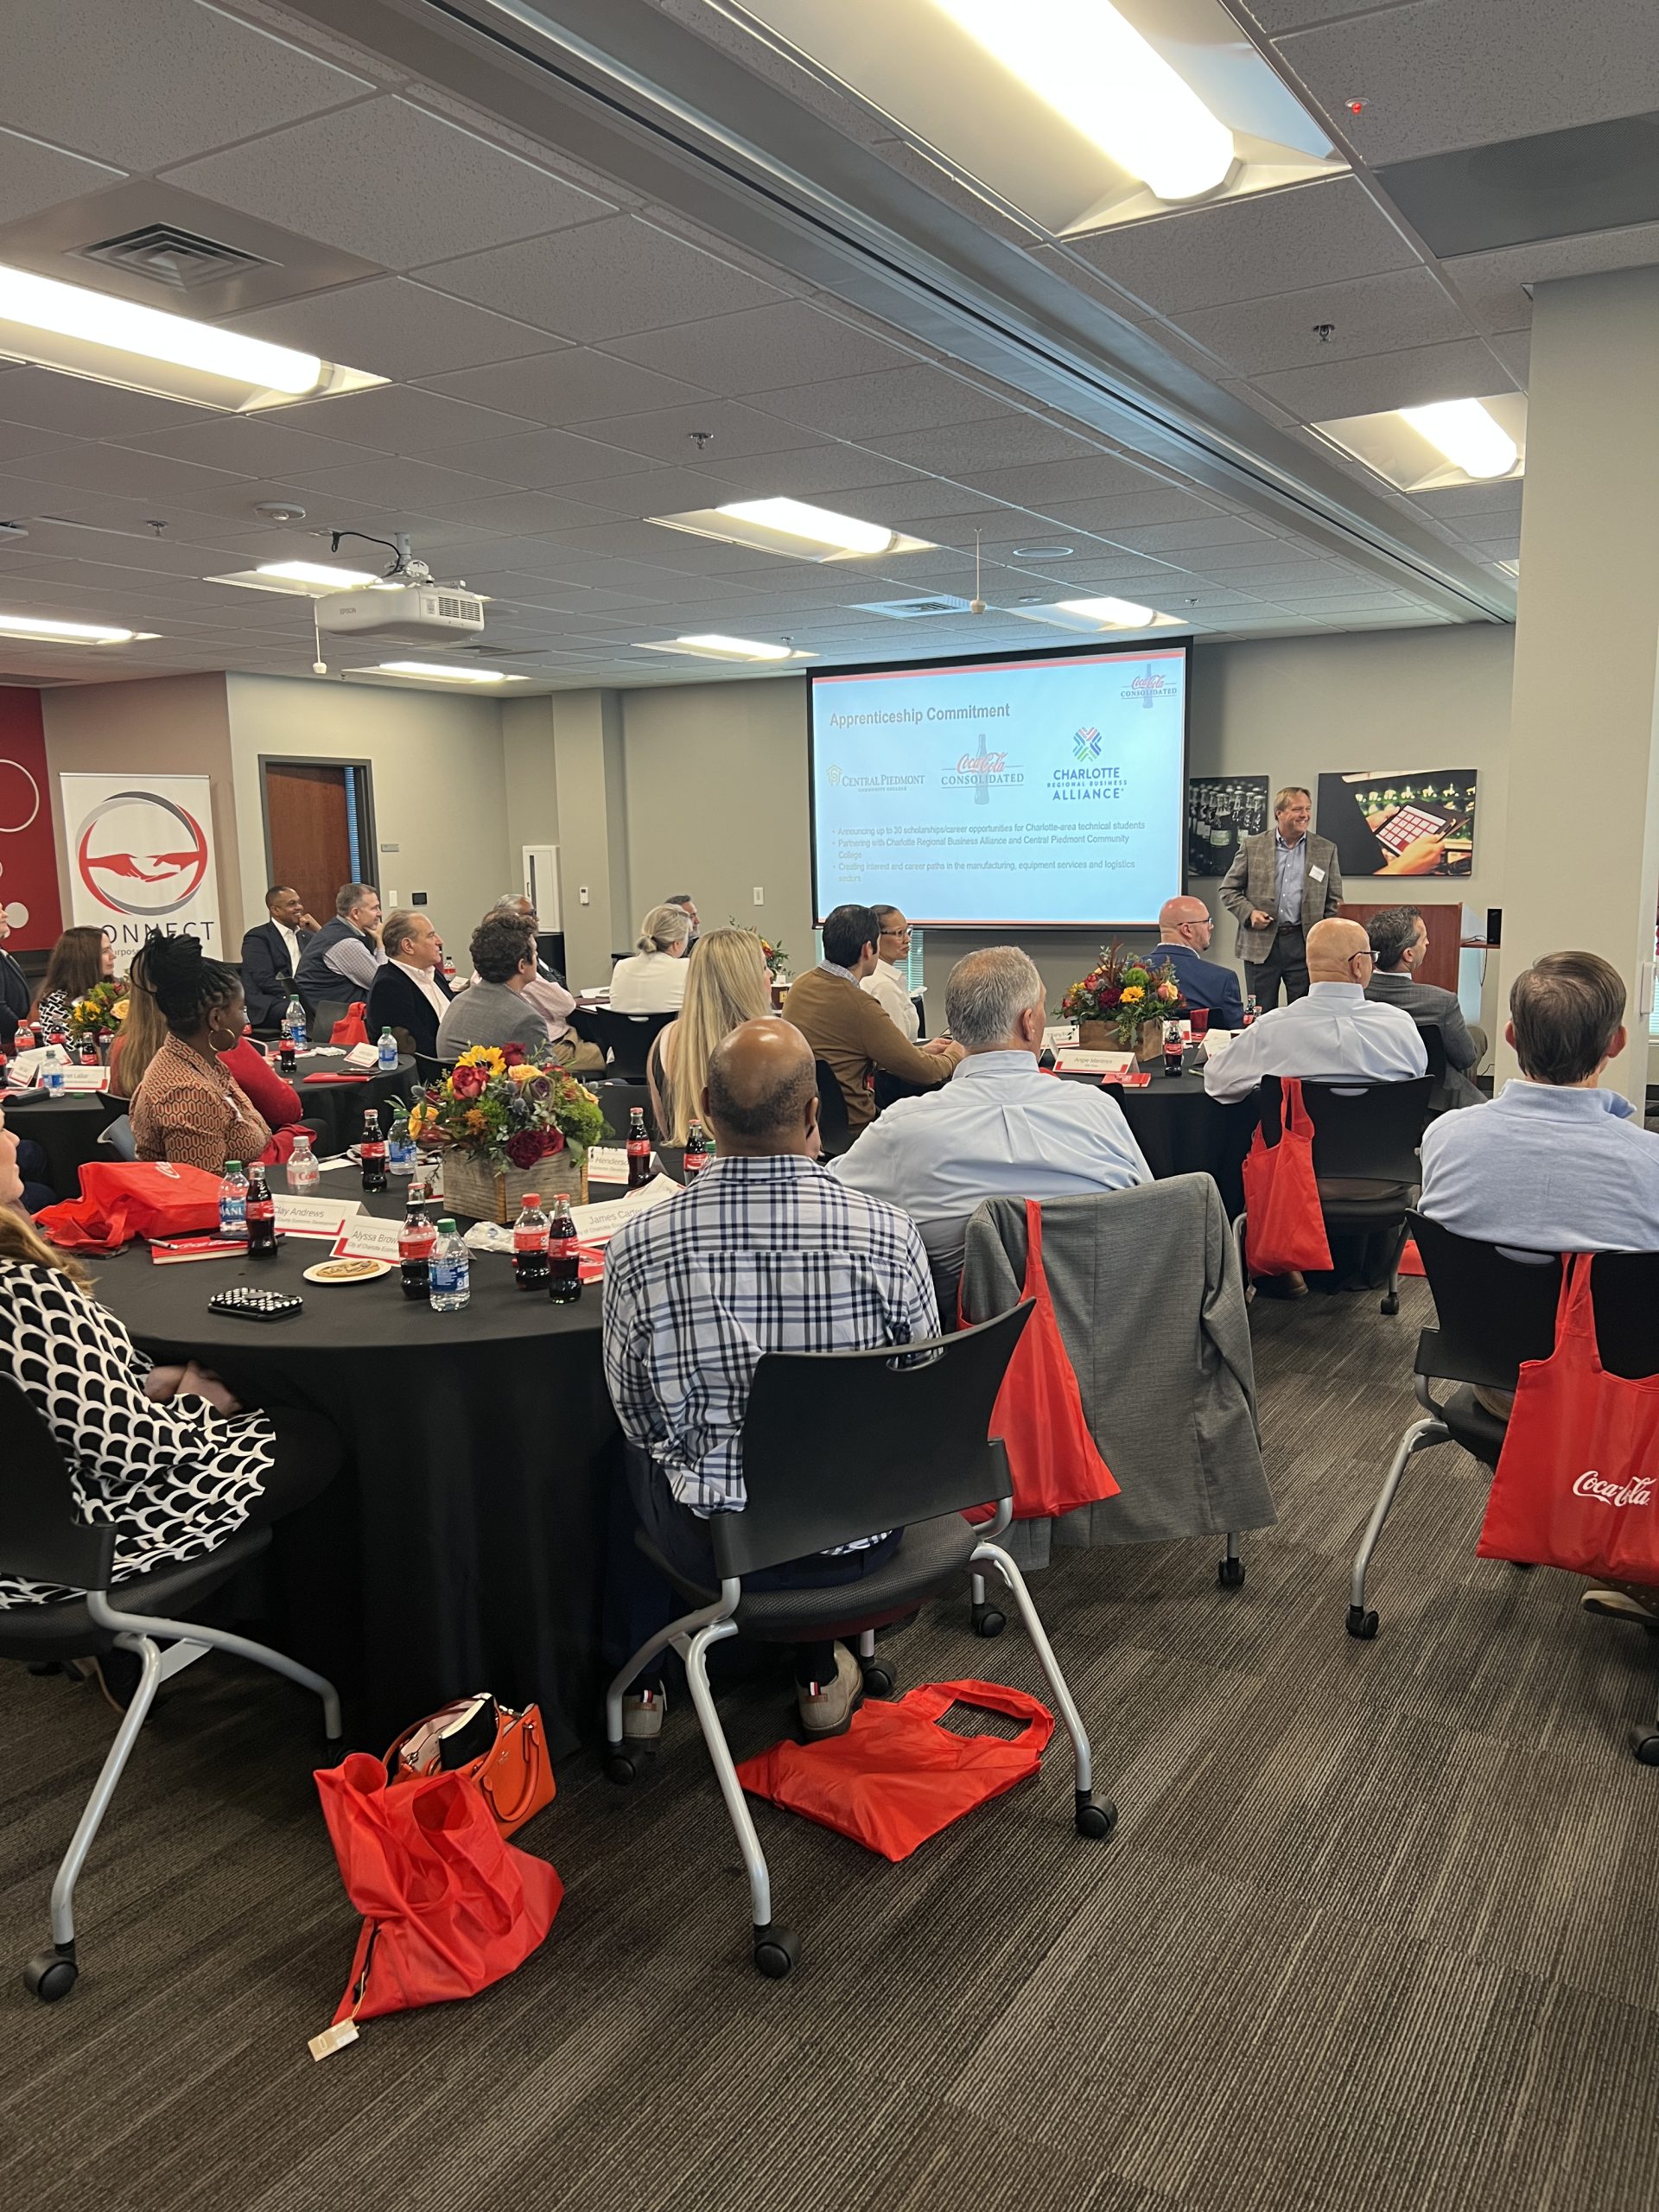 More than 60 participants from the public and private sector attended an event at Coca-Cola Consolidated highlighting opportunities in the manufacturing sector hosted in partnership with CLT Alliance.